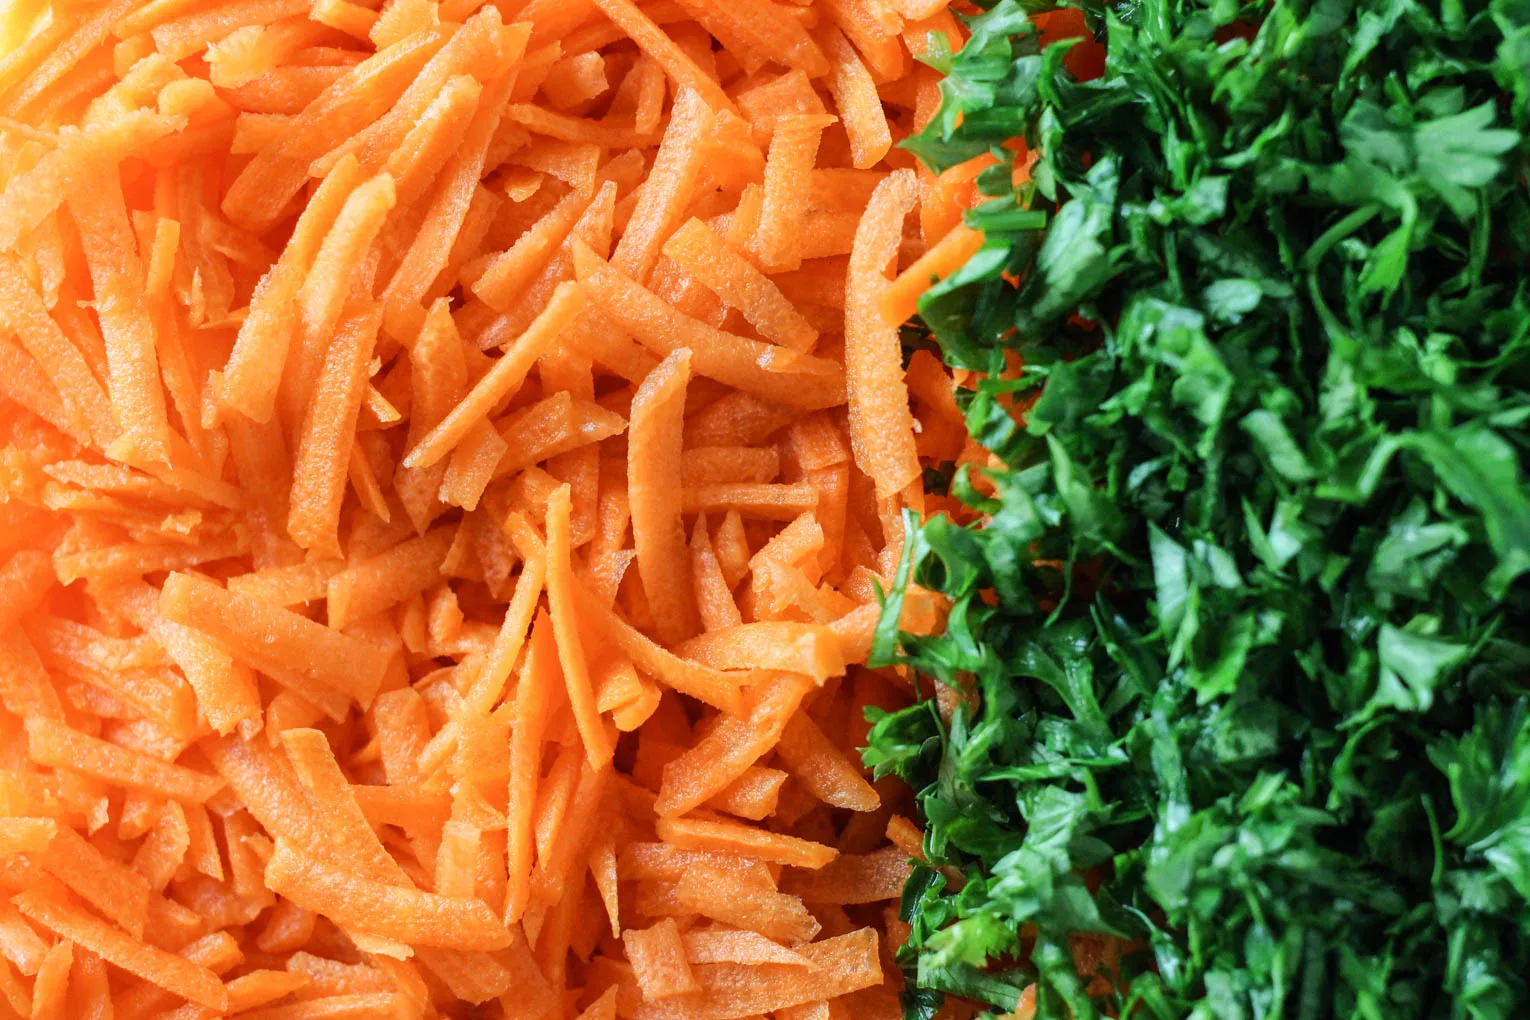 Close up shot of grated carrots on the left and chopped parsley on the right.